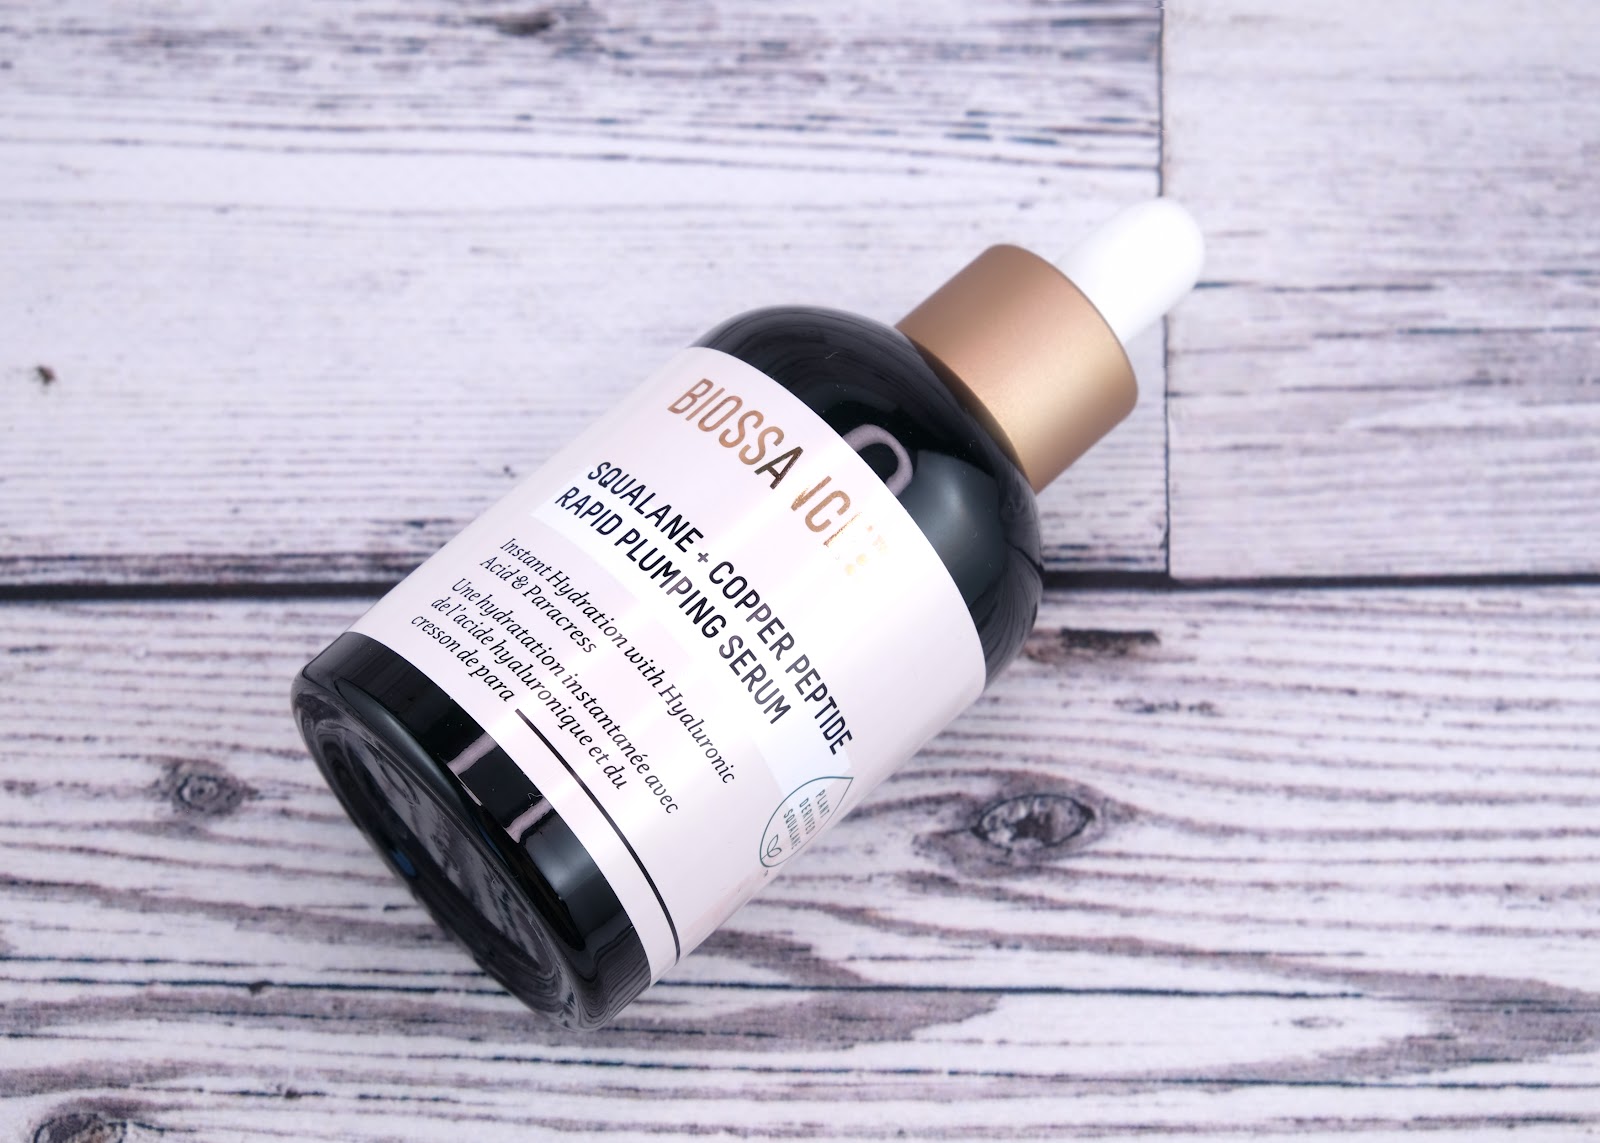 Biossance | Squalane + Copper Peptide Rapid Plumping Serum: Review